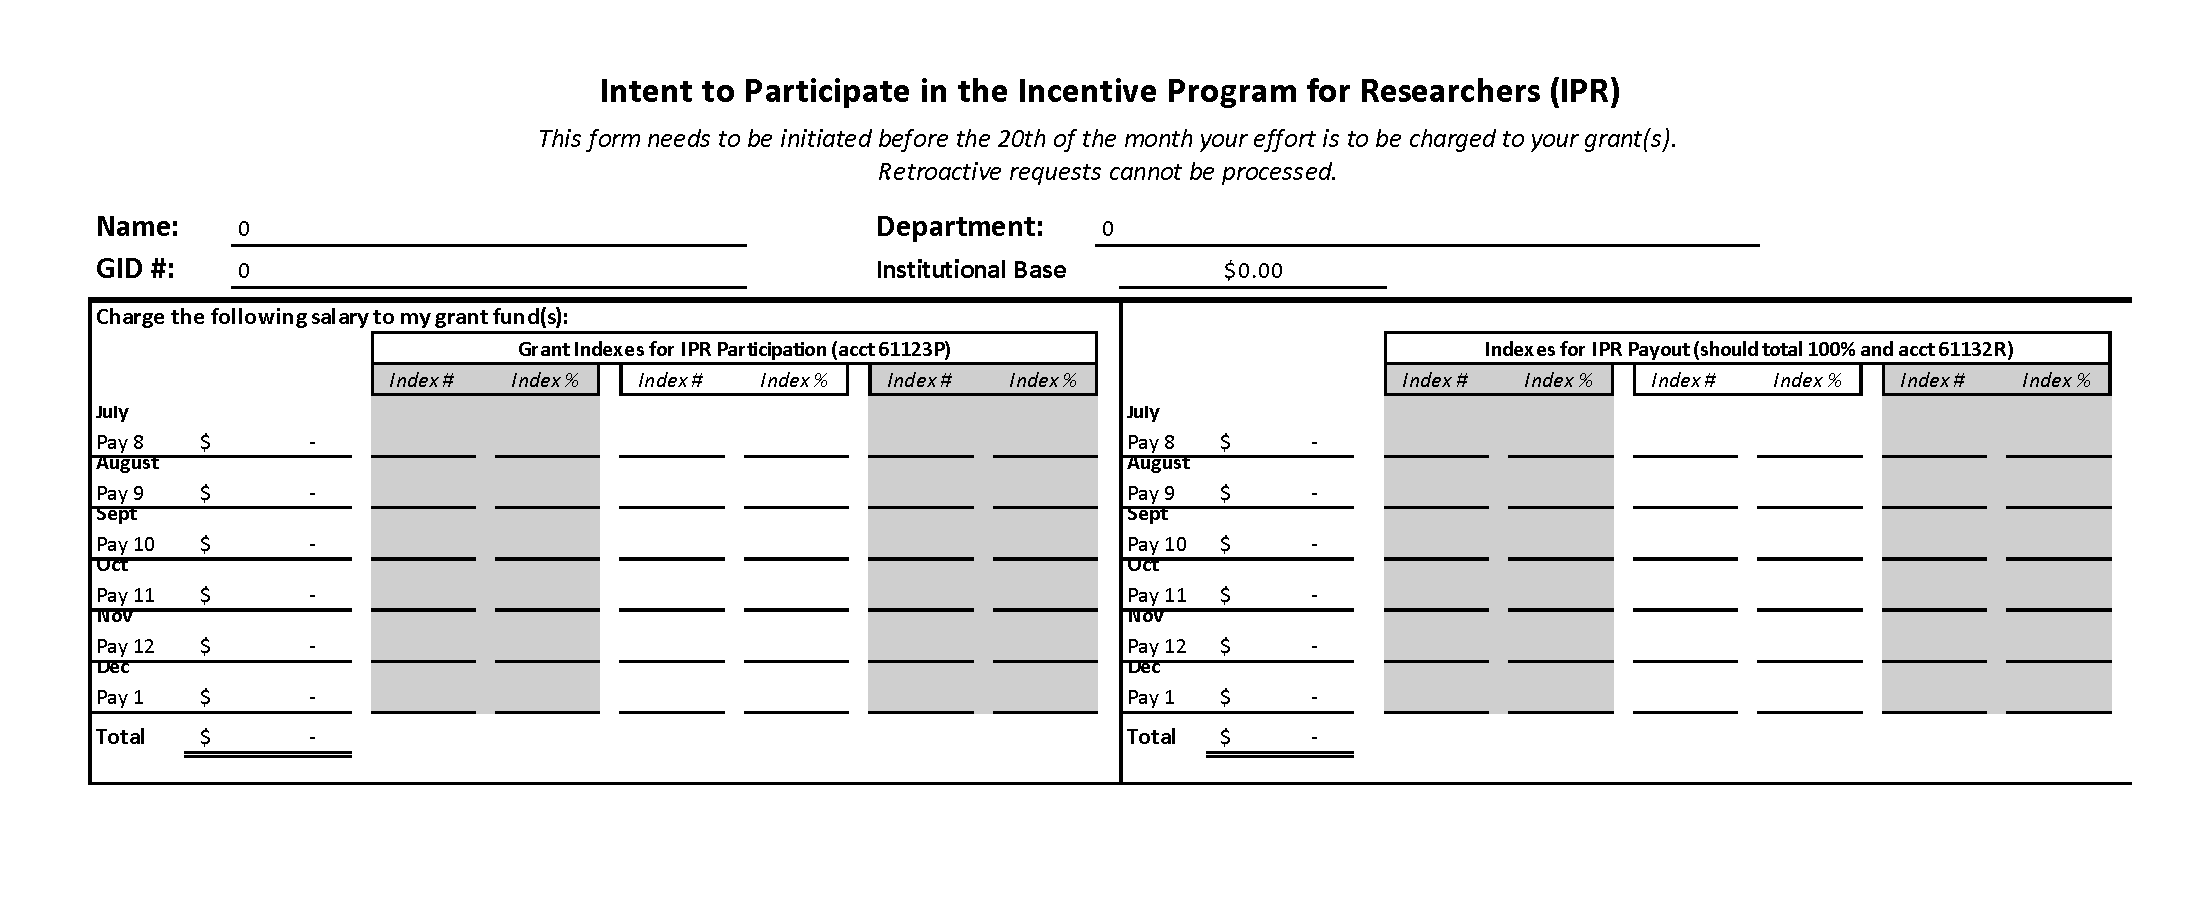 example of the Financial Information portion of the IPR Intent to Participate Form